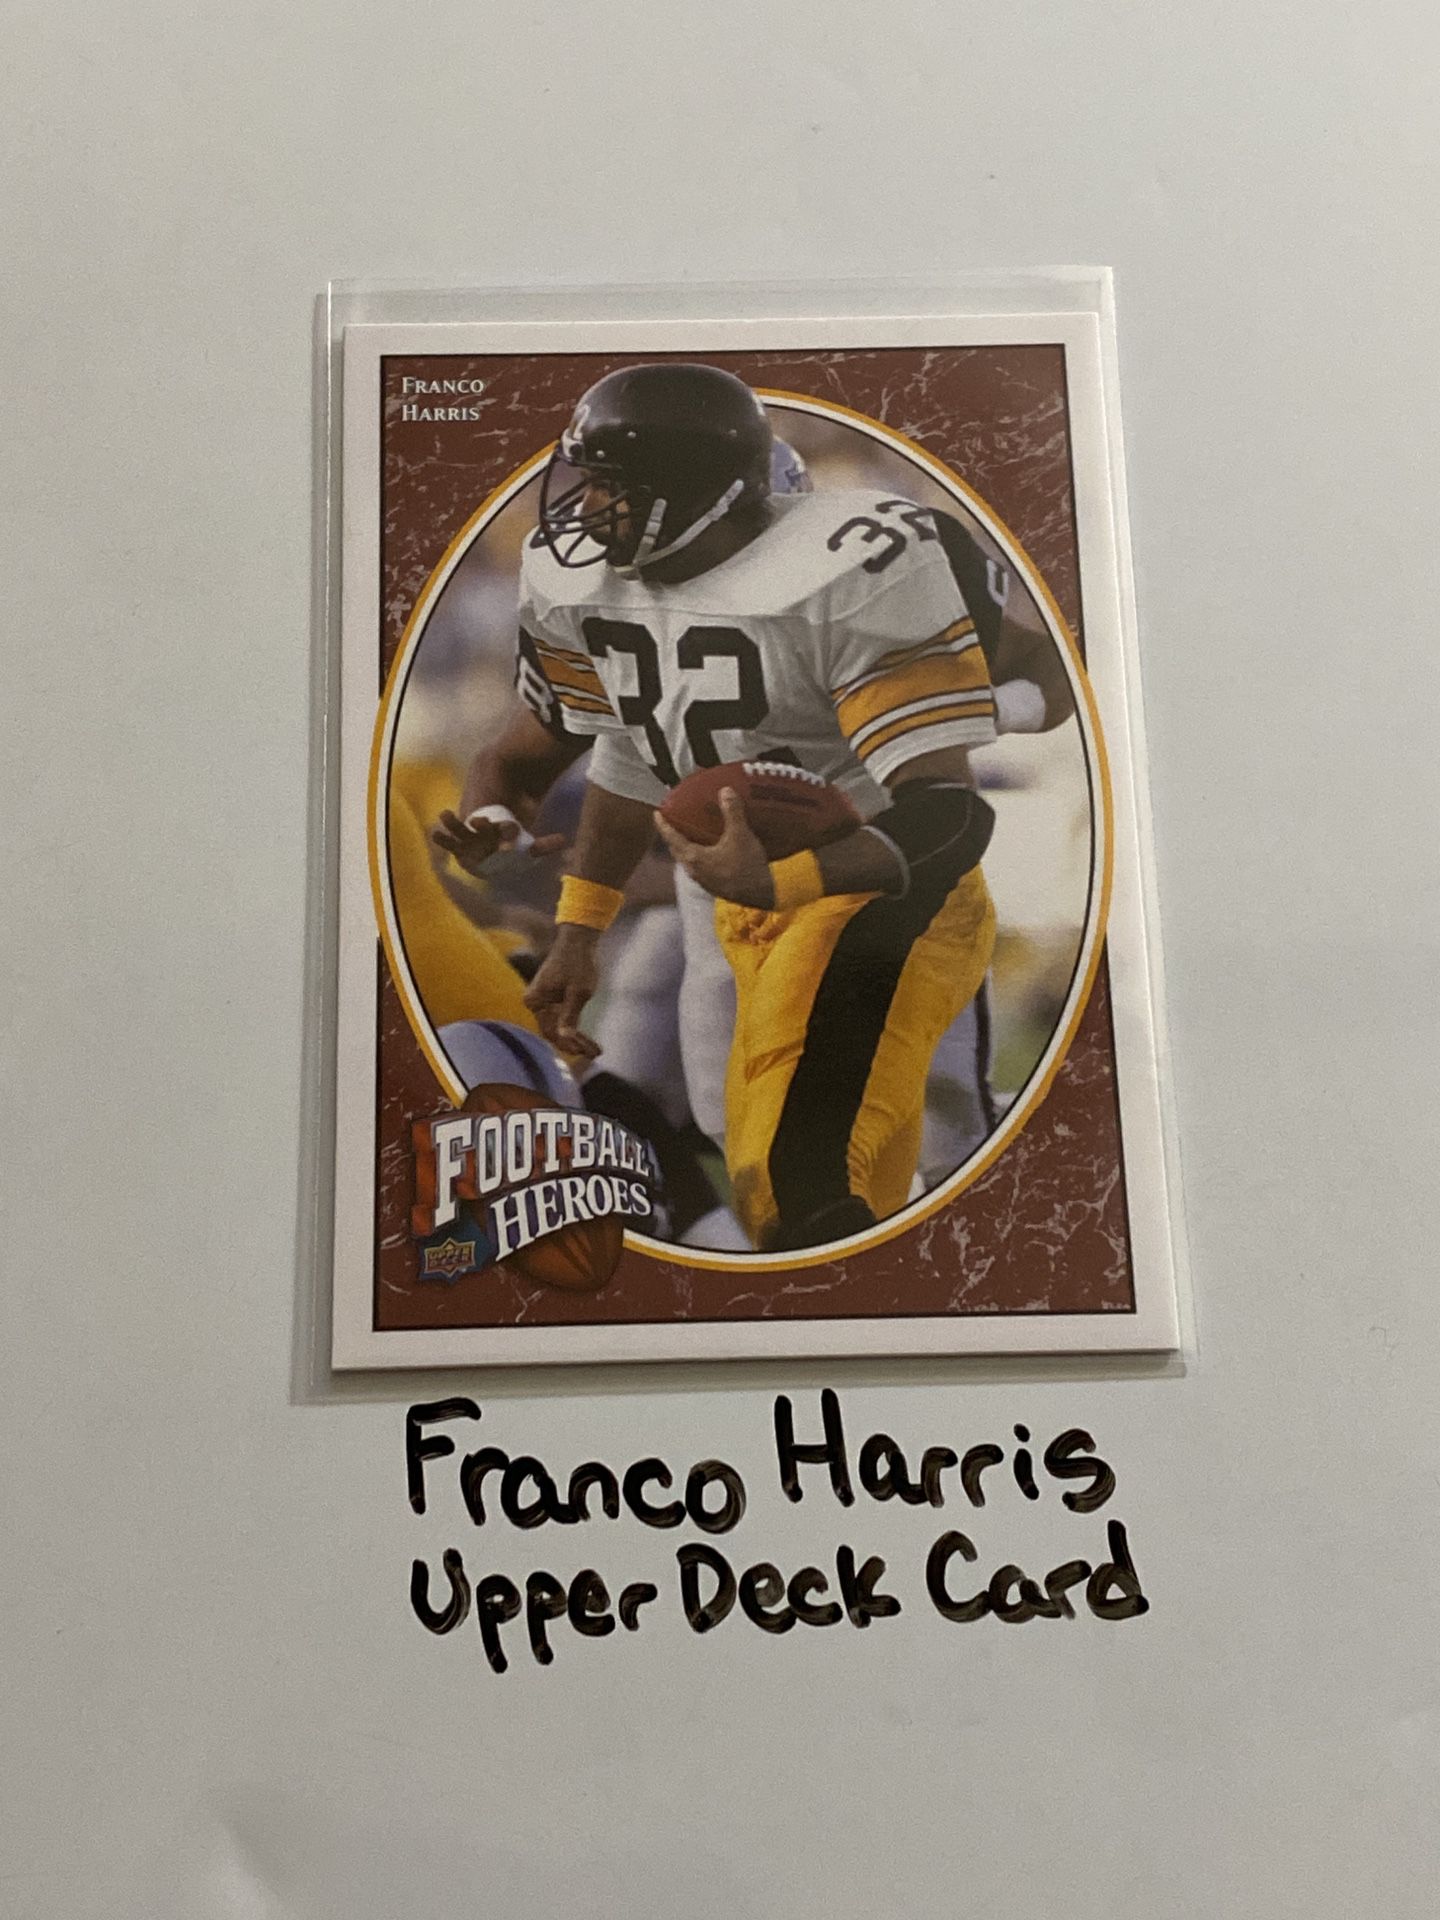 Franco Harris Pittsburgh Steelers Hall of Fame RB Upper Deck Card. 